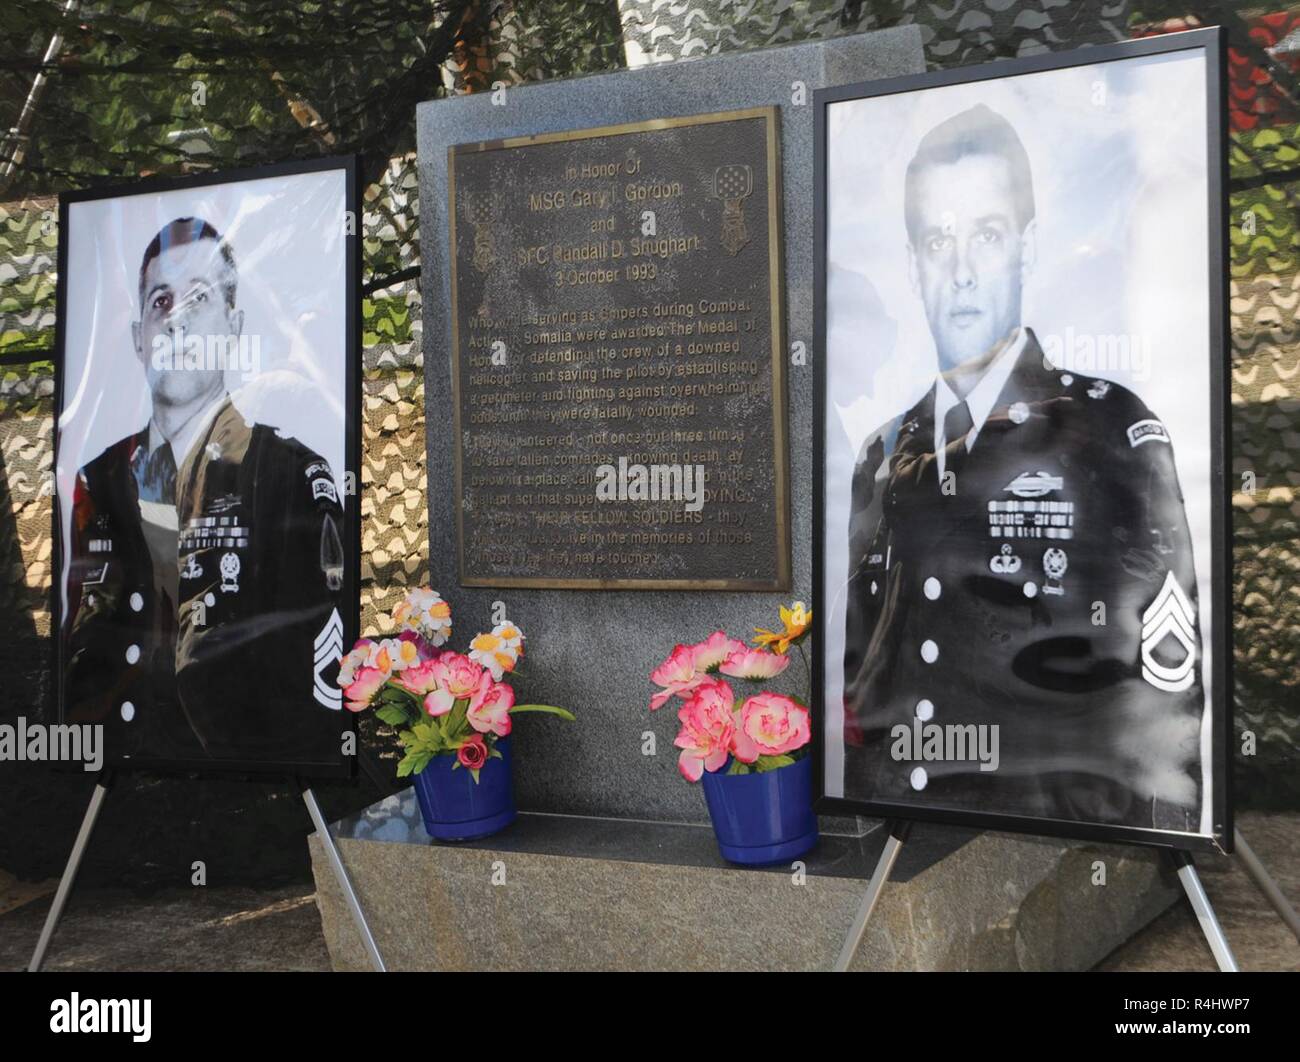 Large portraits of Sgt. 1st Class Randall D. Shughart (left) and Master Sgt. Gary I. Gordon flank the plaque that synopsizes the story of their actions during the Battle of Mogadishu Oct. 3, 1993. Stock Photo